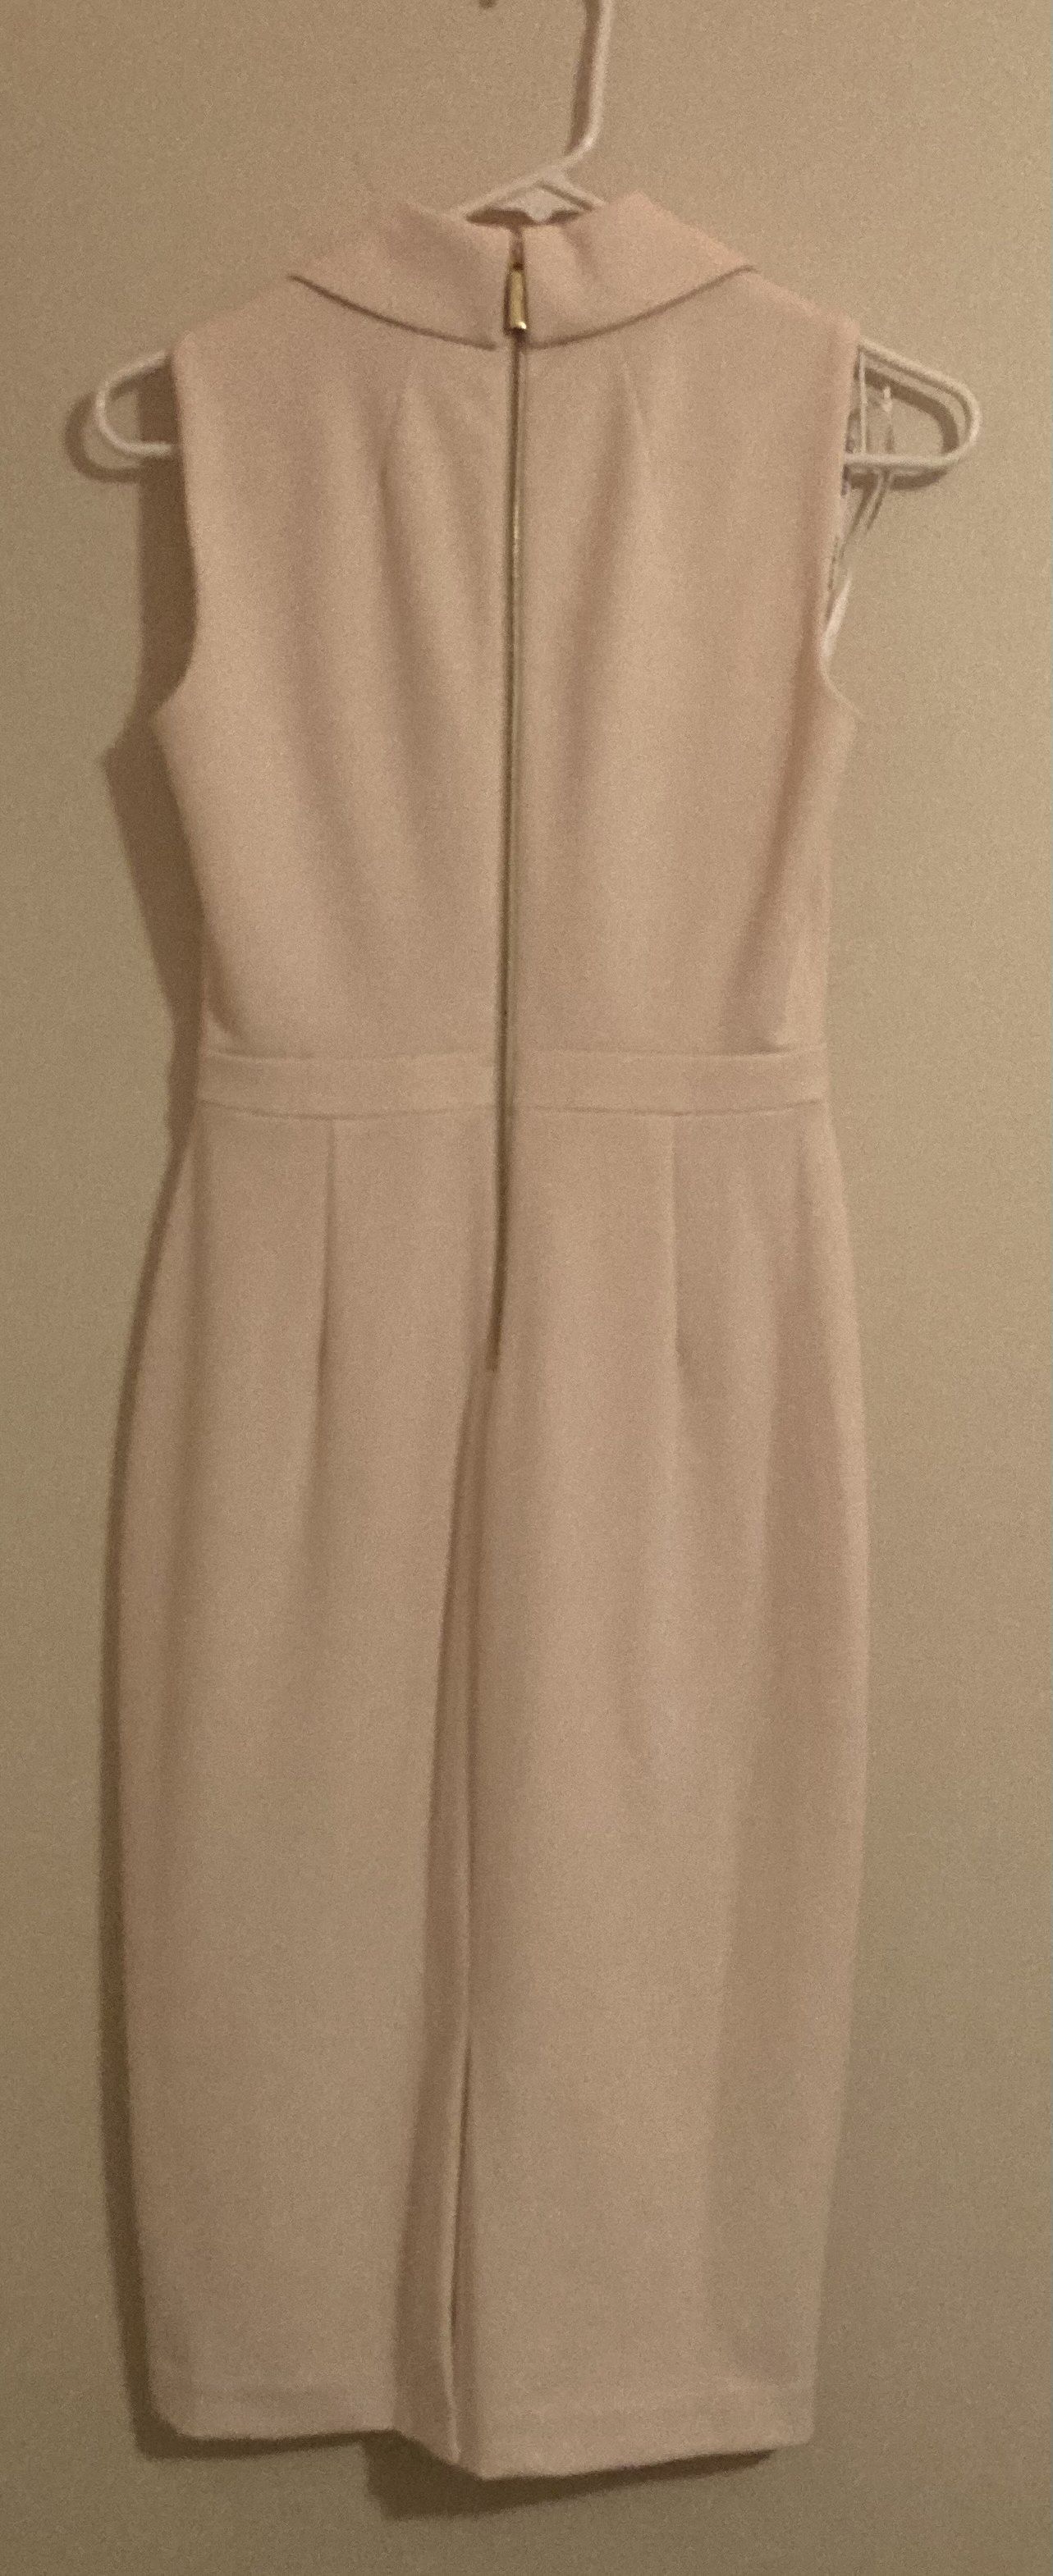 Calvin Klein Size 2 Pageant Interview High Neck Light Pink Cocktail Dress on Queenly